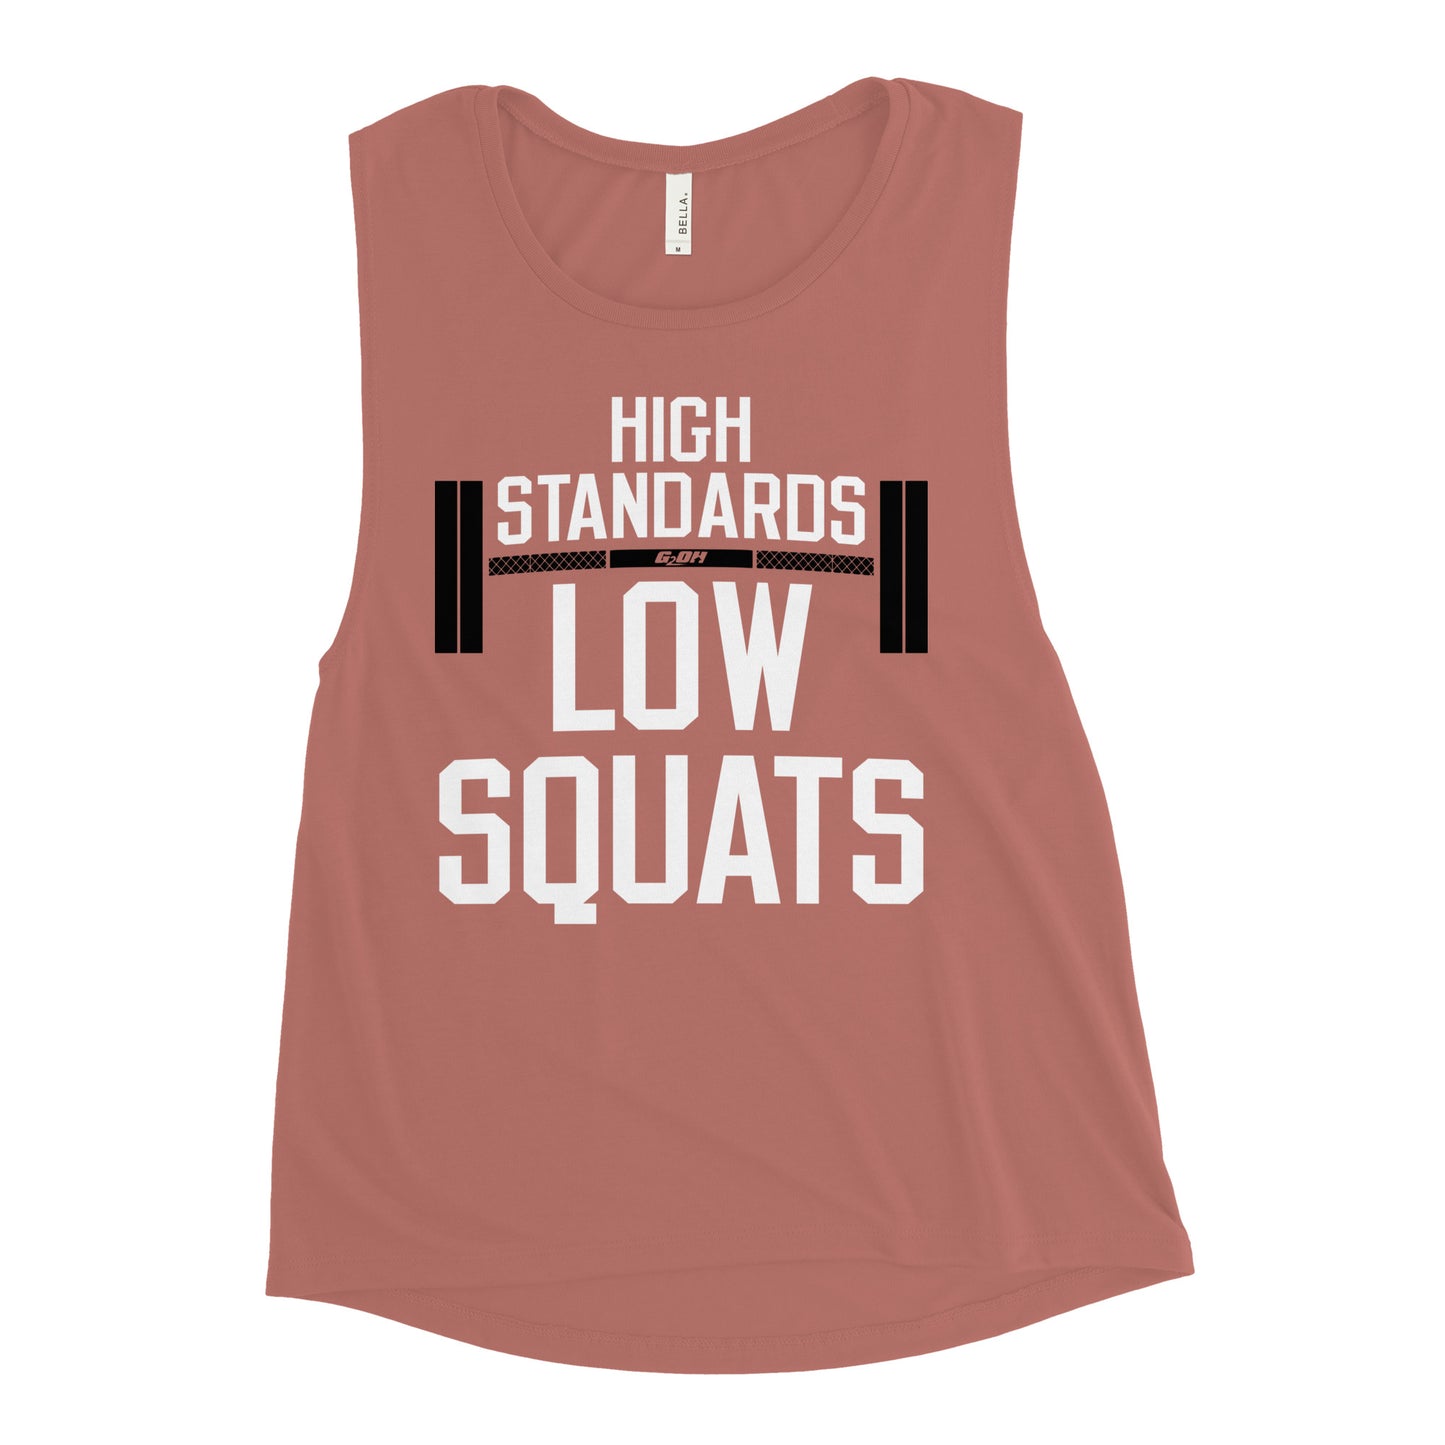 High Standards Low Squats Women's Muscle Tank